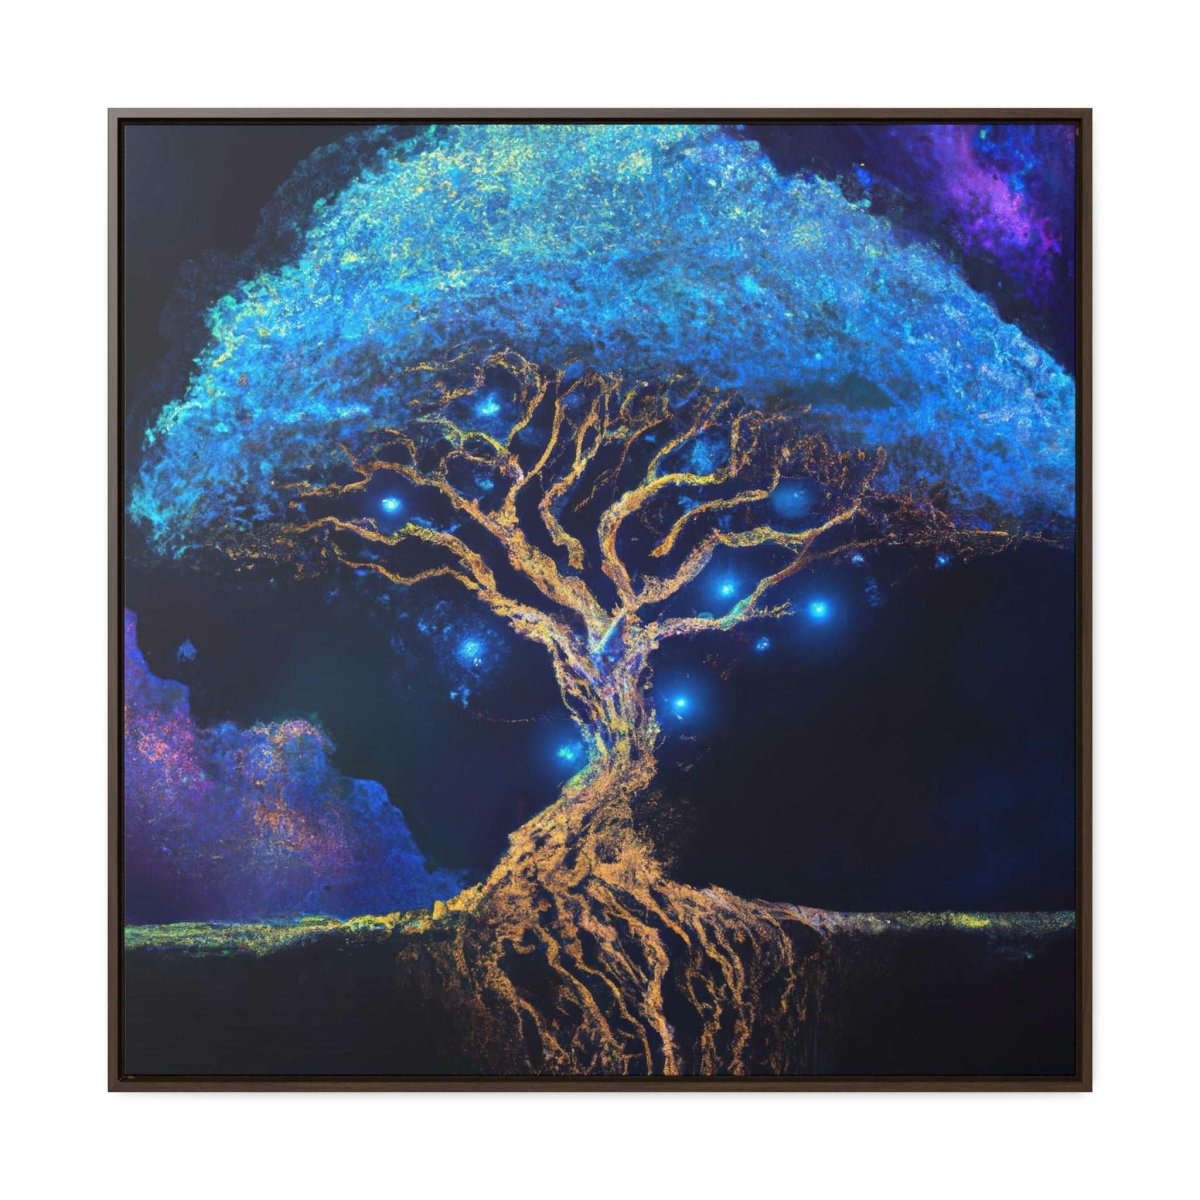 Abstract Tree of Life Blue Night Sky Painting - Framed Digital Art - HigherFrequencies